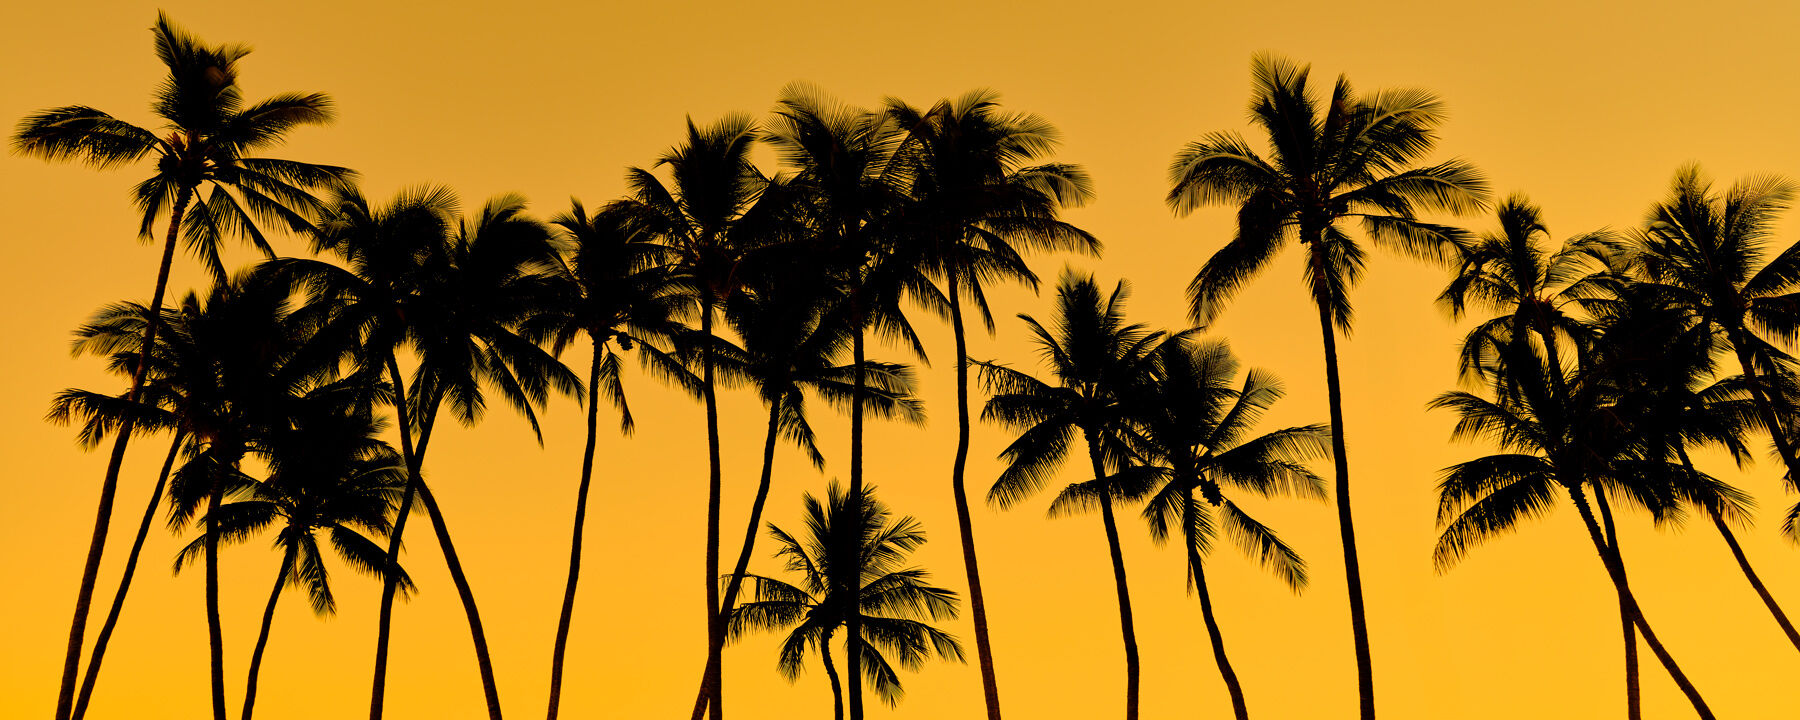 Gold Zenith is a beautiful golden sunset silhouette featuring coconut palm trees against a gold background on the island of Molokai by Andrew Shoemaker